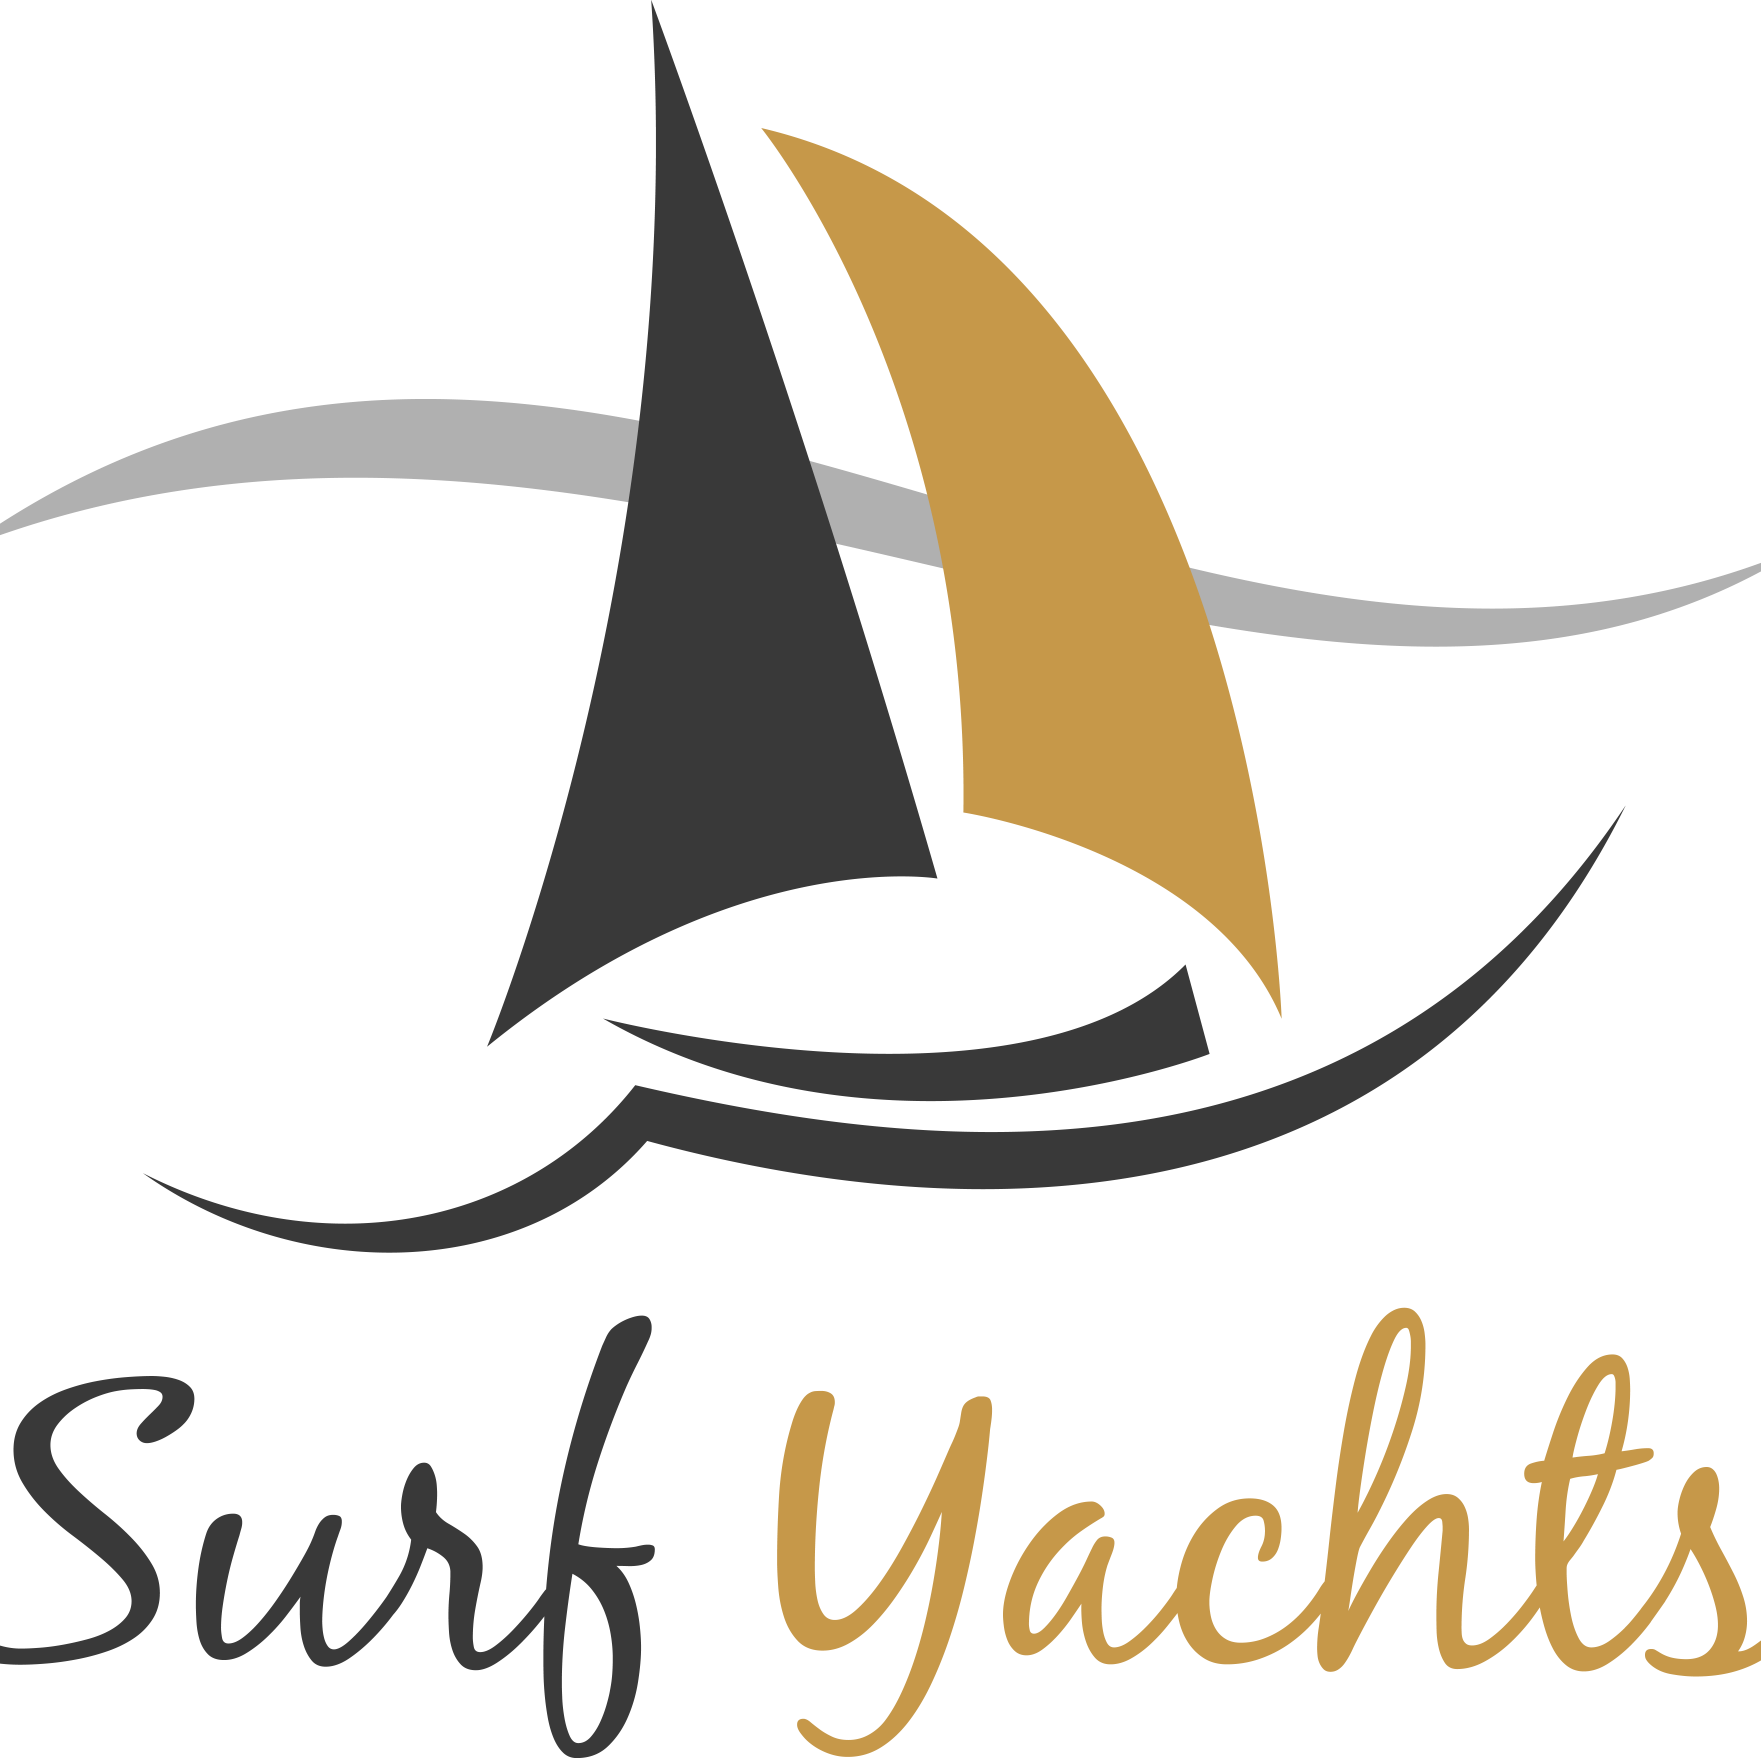 Surf Yachts is the online luxury and yachting business portal.